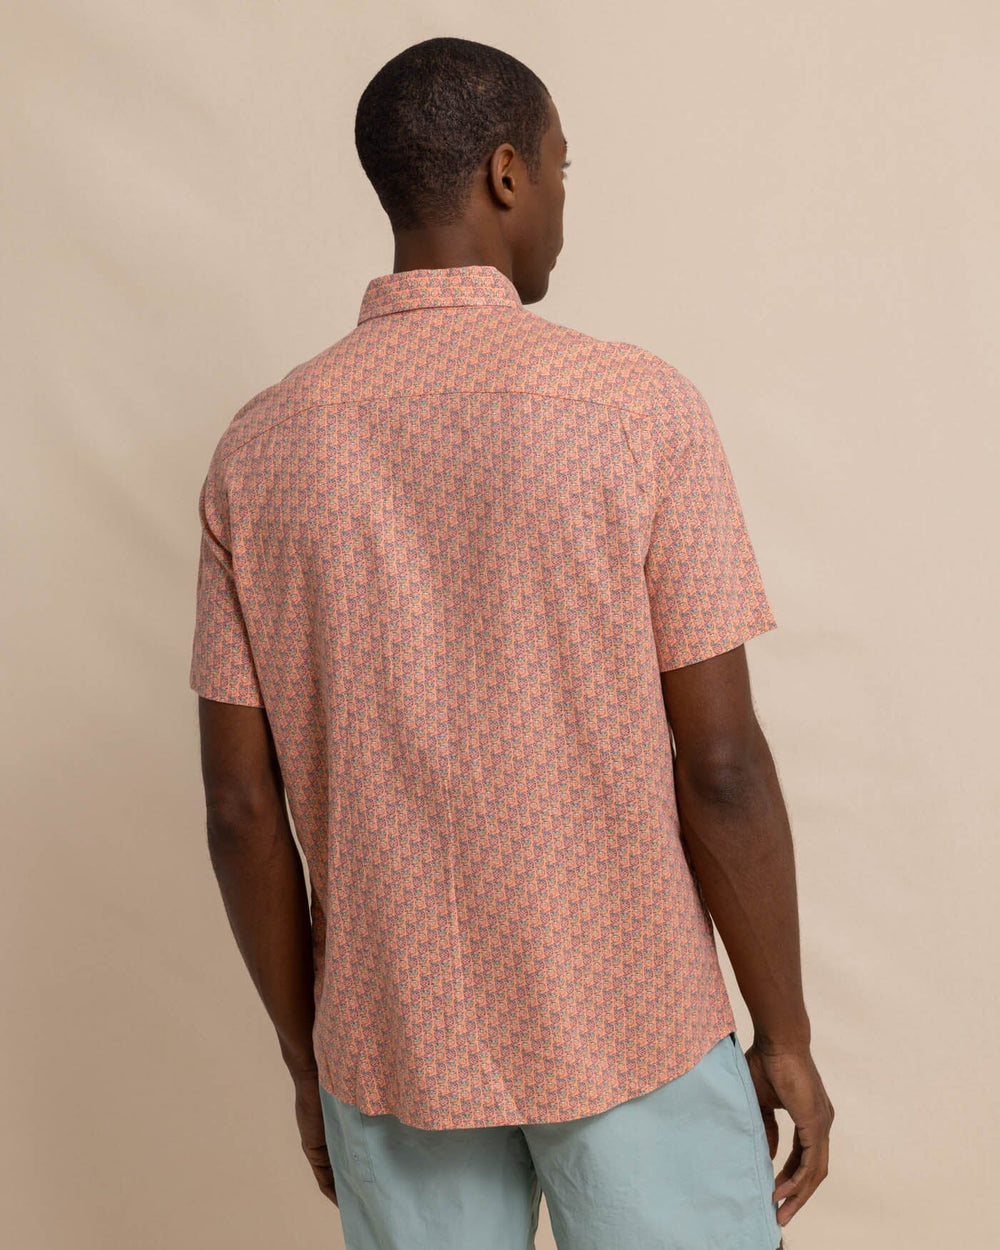 The back view of the Southern Tide Linen Rayon Vacation Views Short Sleeve SportShirt by Southern Tide - Desert Flower Coral